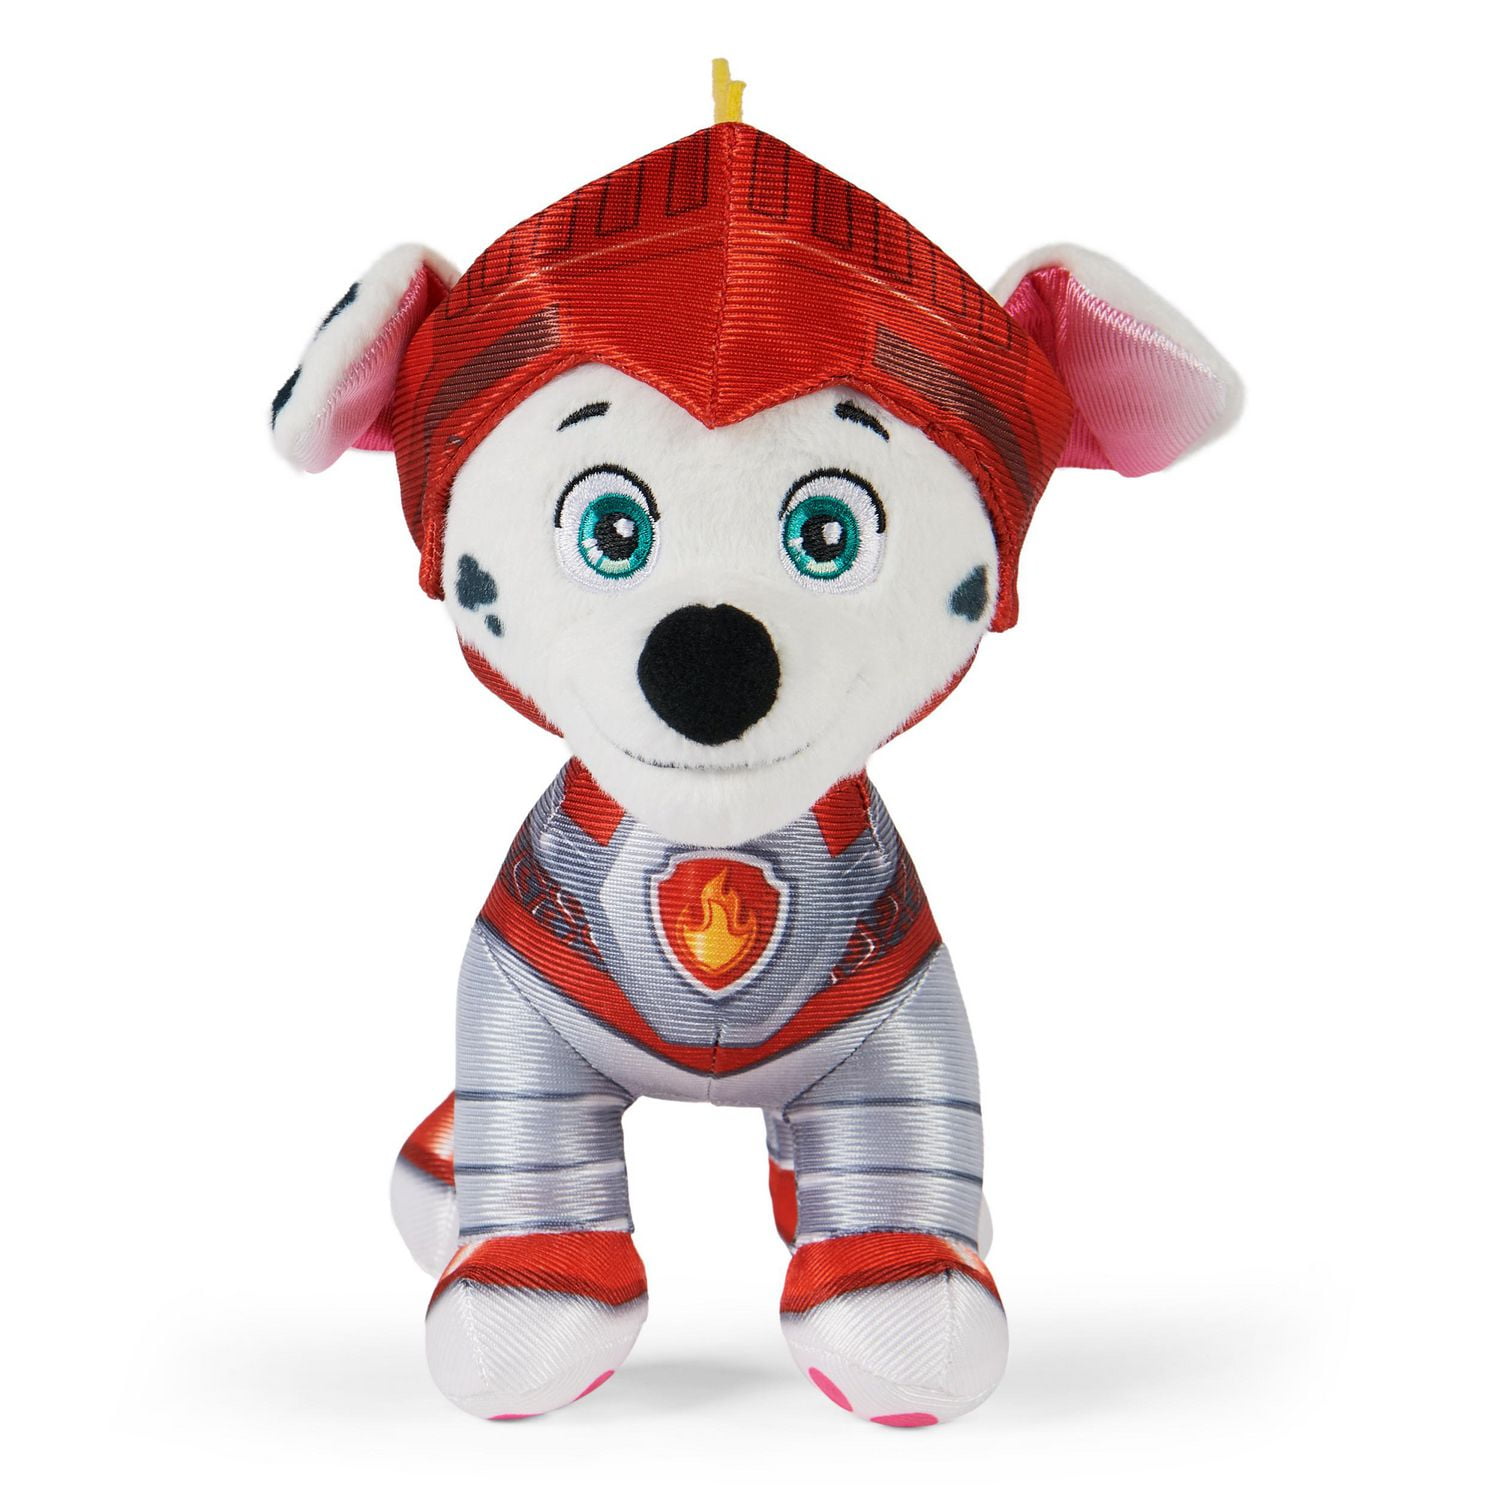 PAW Patrol, Rescue Knights Marshall Stuffed Animal Plush Toy, 8-inch, Kids  Toys for Ages 3 and up